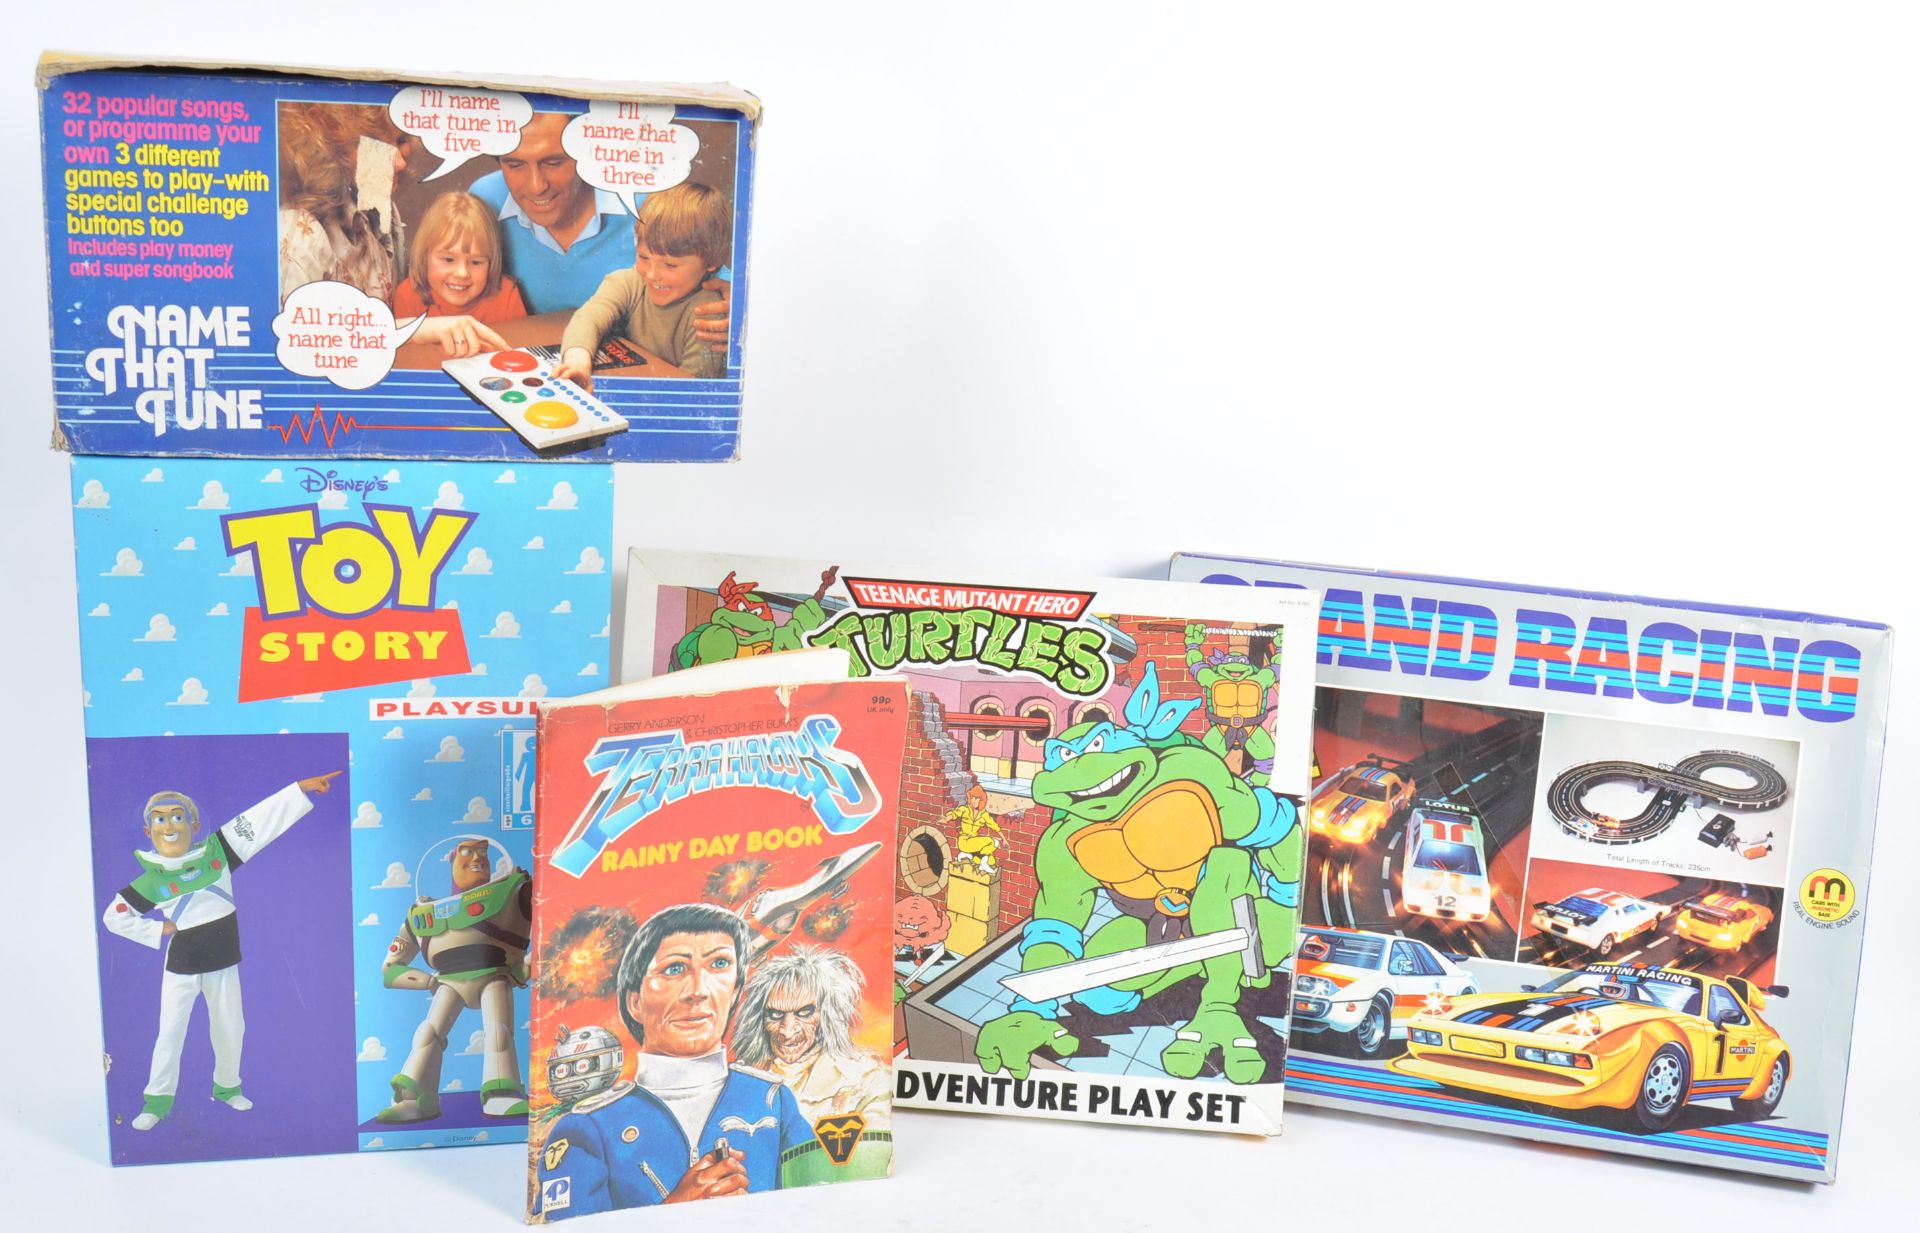 COLLECTION OF VINTAGE BOXED GAMES / TOYS / PLAYSETS